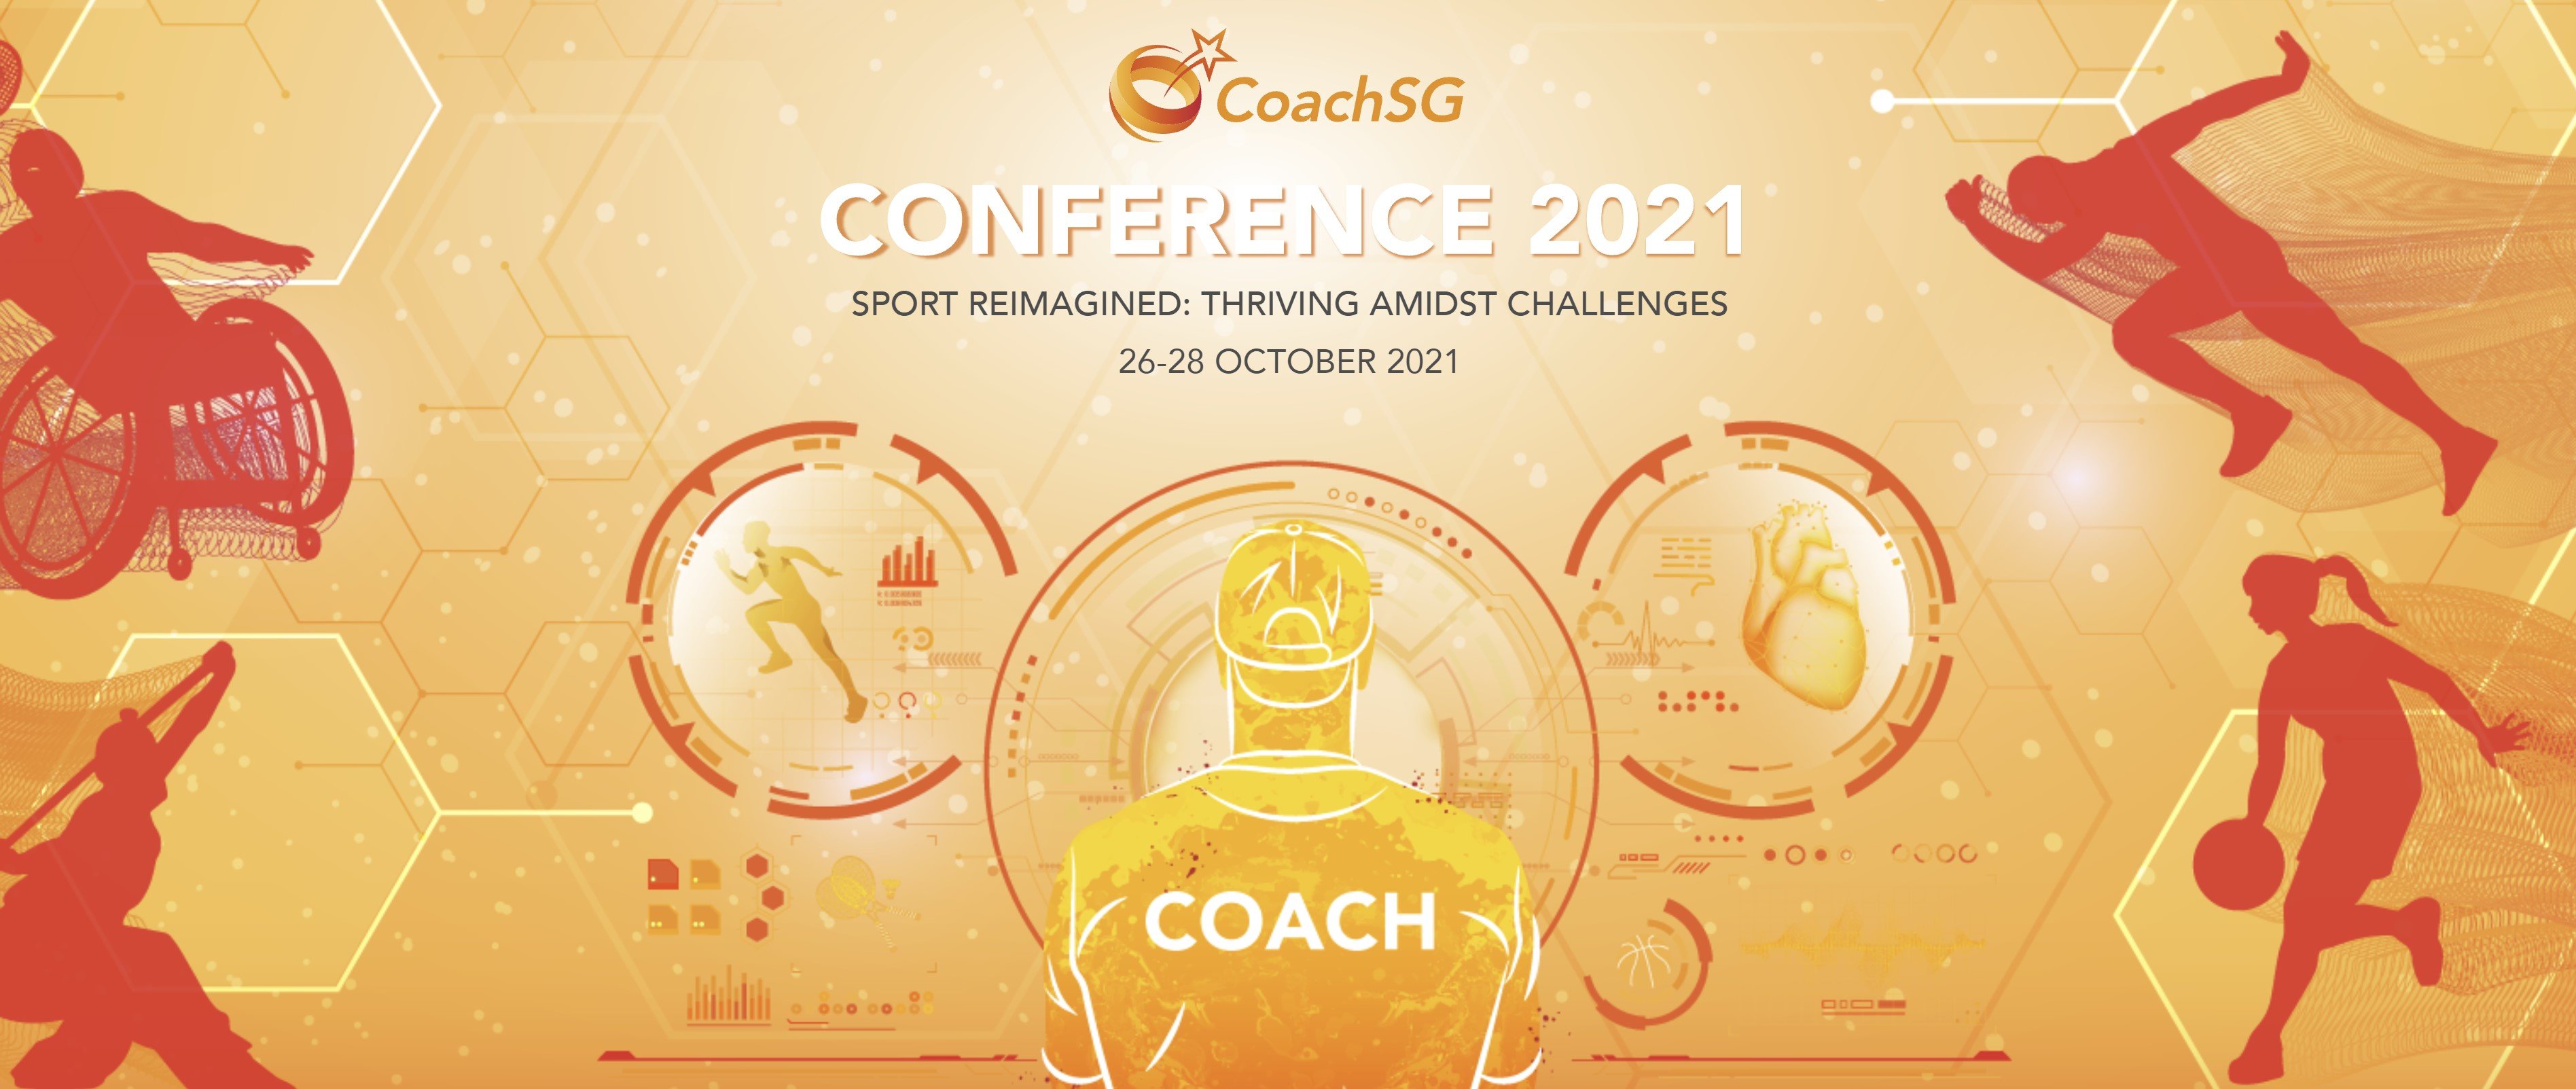 CoachSG Conference 2021 - All You Need To Know ahead of the upcoming 3-day hybrid event!